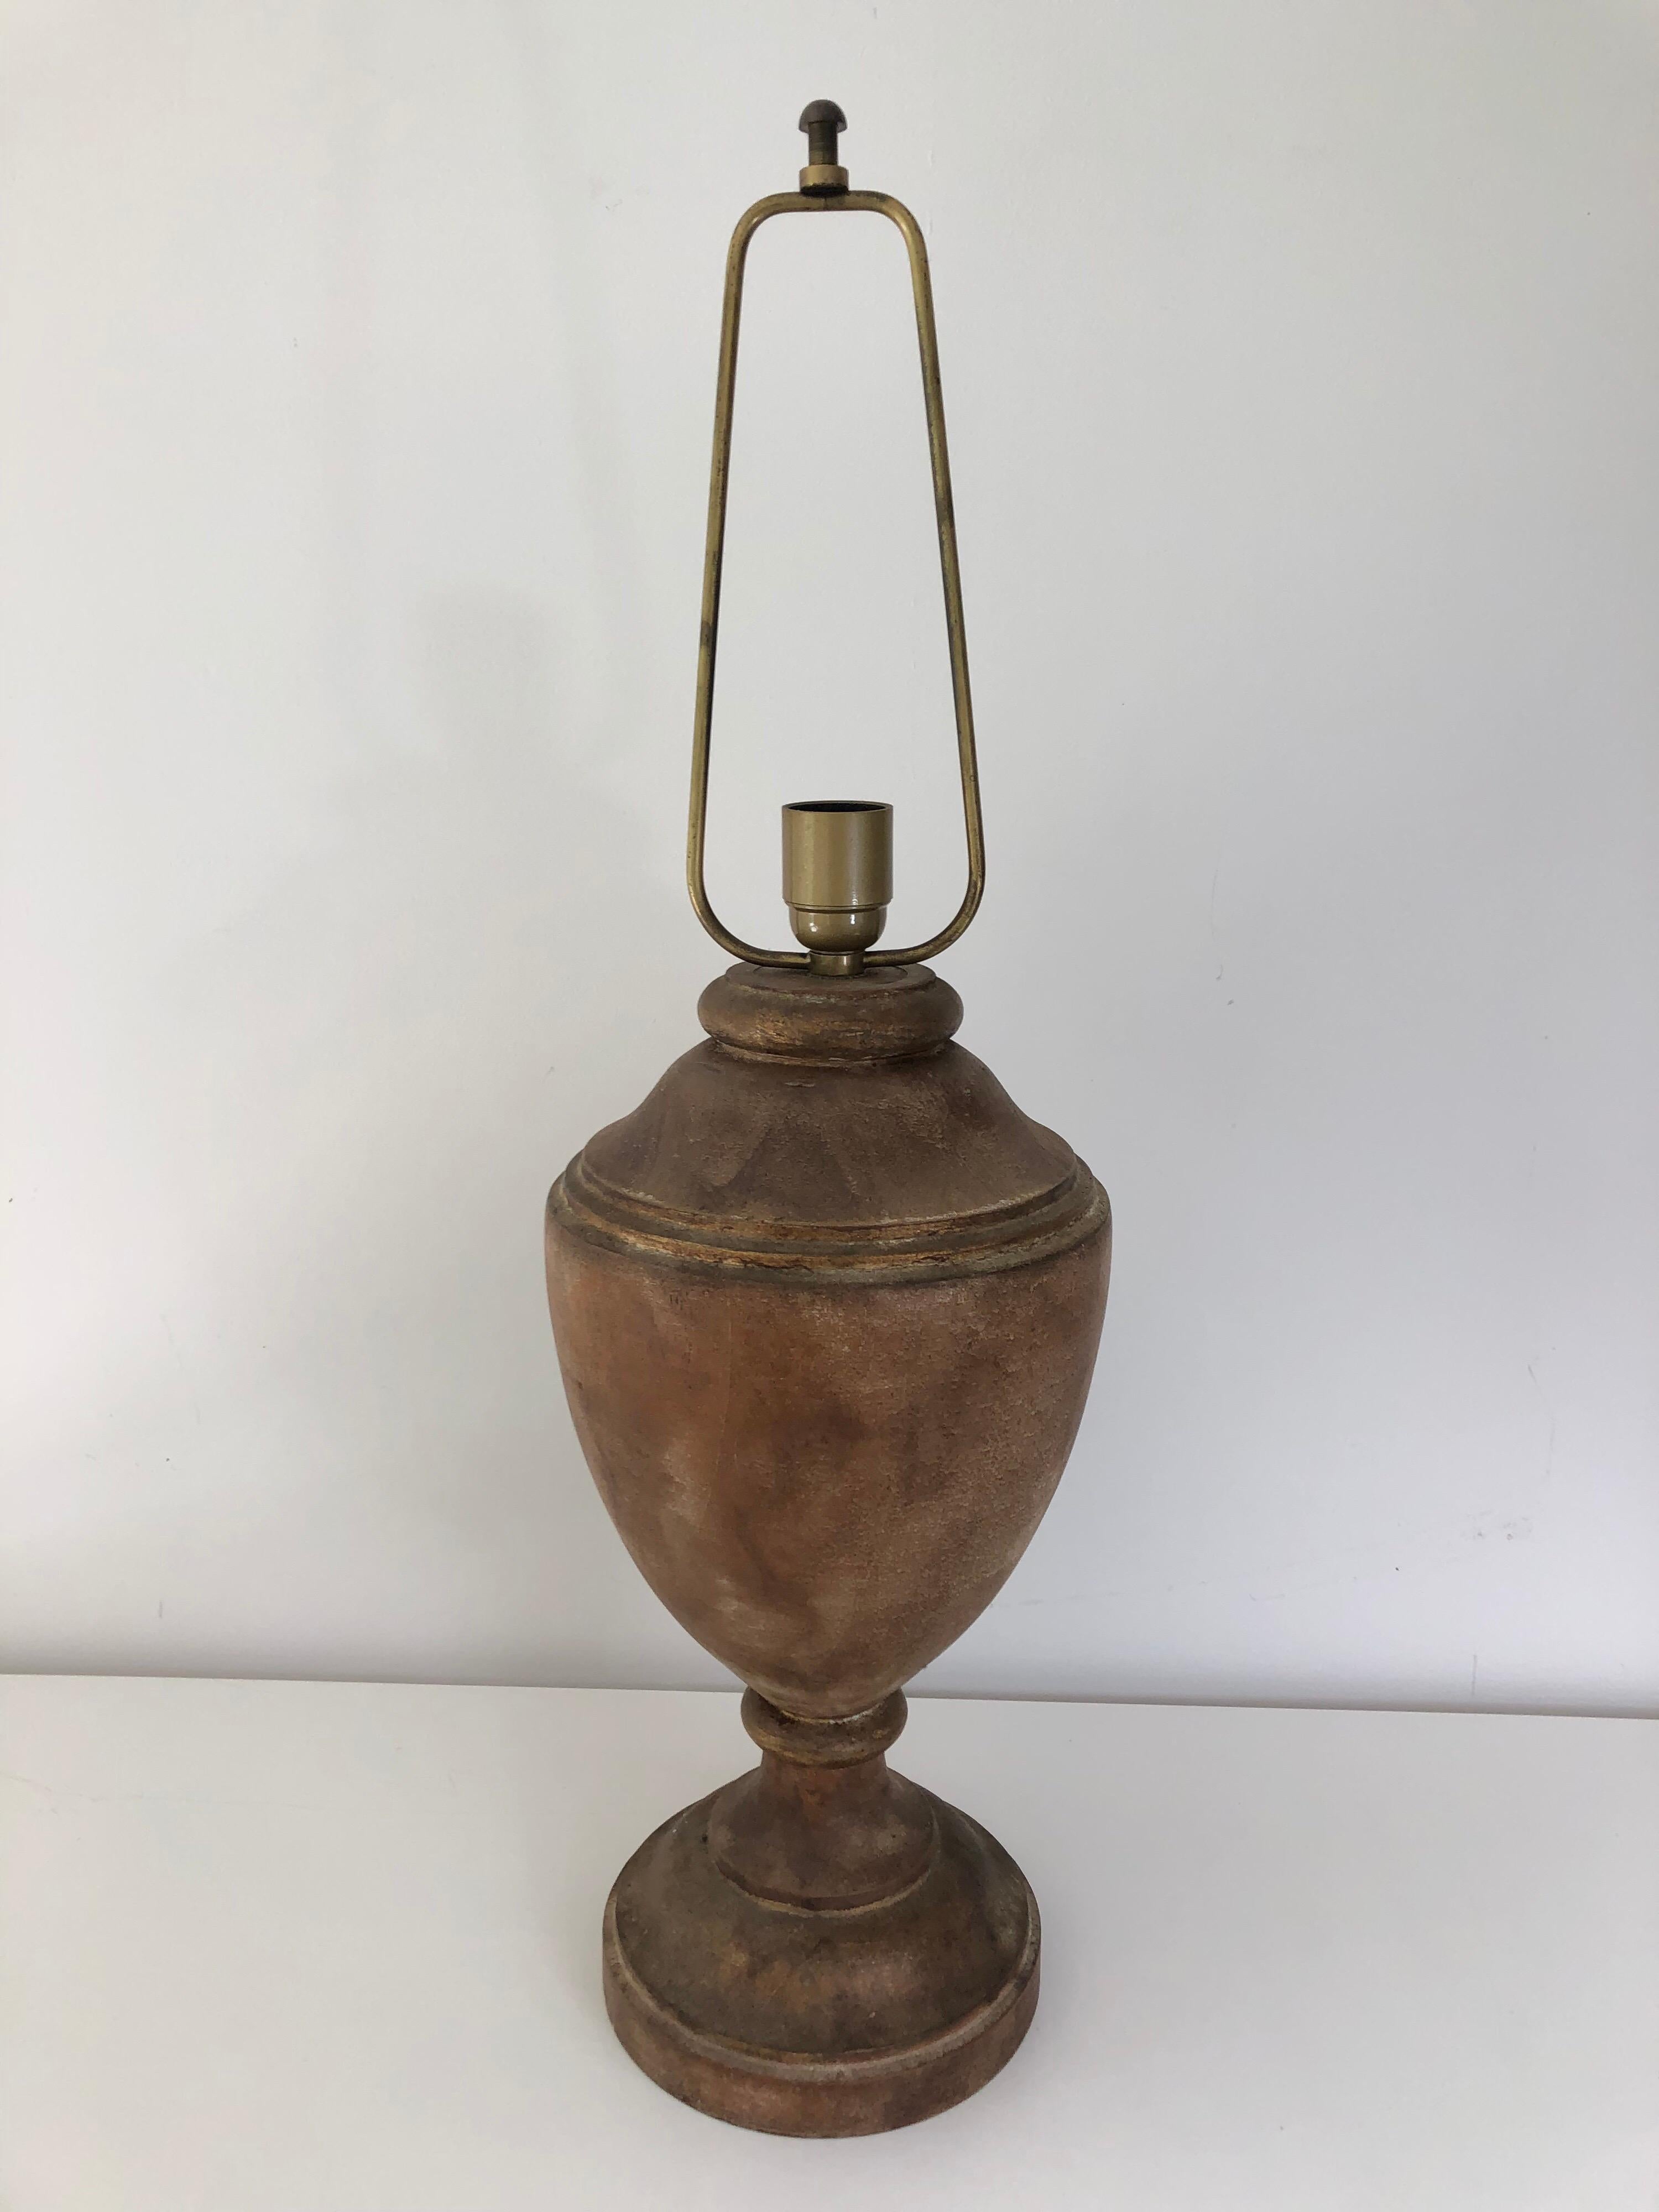 Vintage Giltwood Urn Table Lamp In Good Condition For Sale In Stockton, NJ